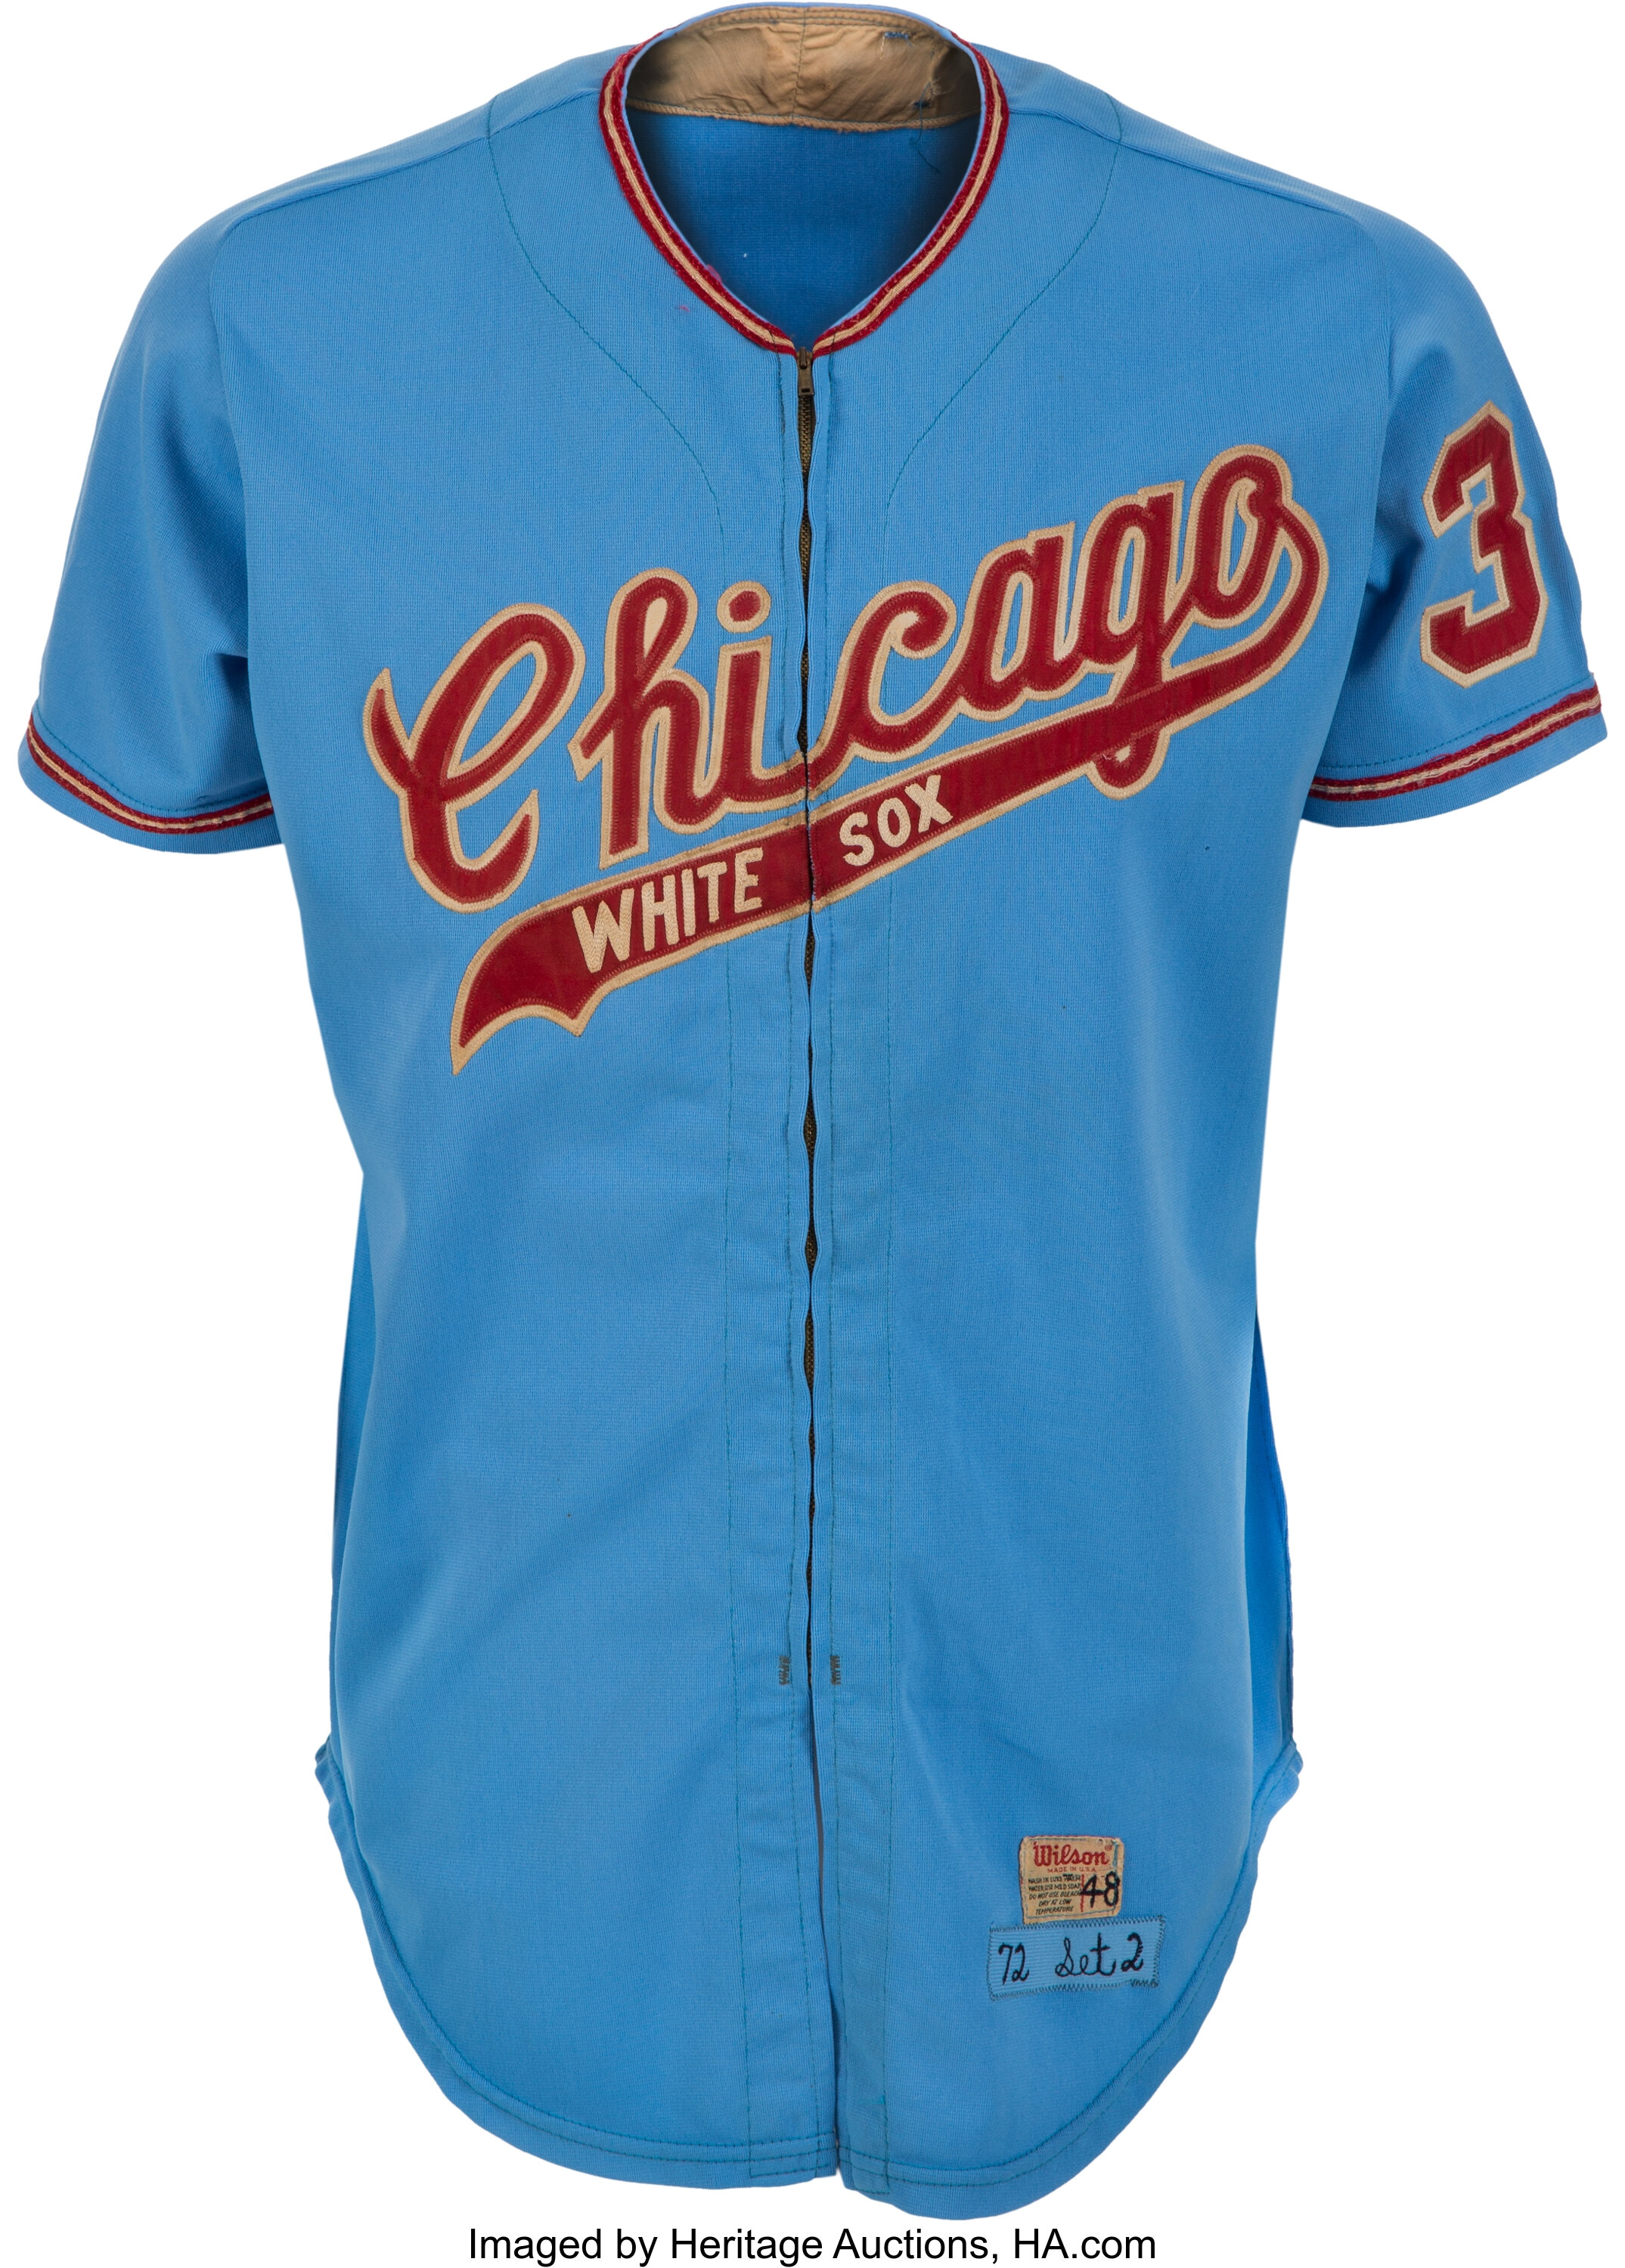 Authentic Chicago White Sox TBC 1972 White/Red Throwback Jersey RARE! 40